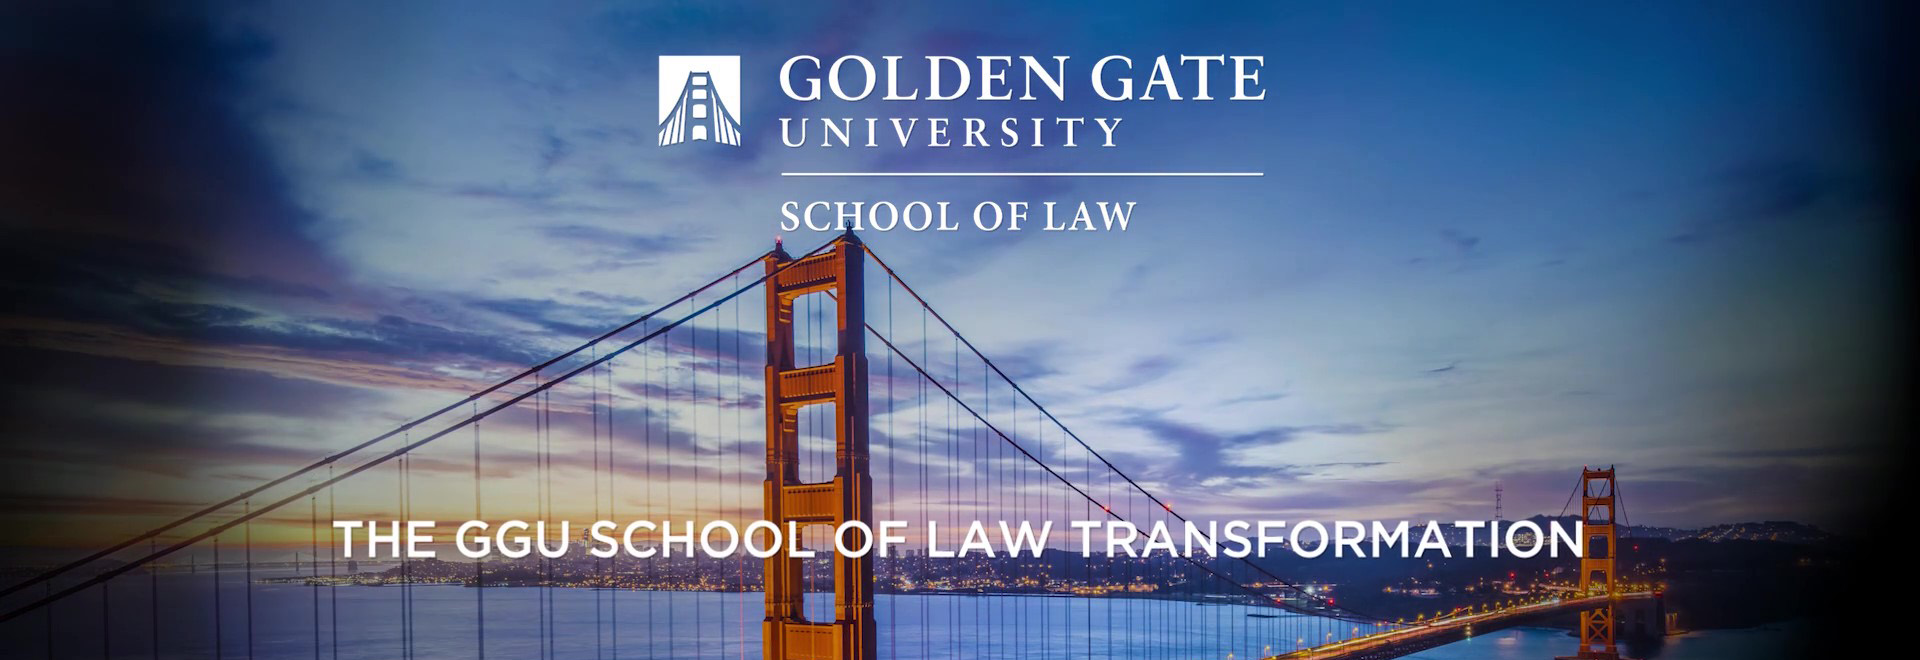 GOLDEN GATE UNIVERSITY SCHOOL OF LAW OFFERS FULL SCHOLARSHIPS TO ALL NEW IN-PERSON JD STUDENTS